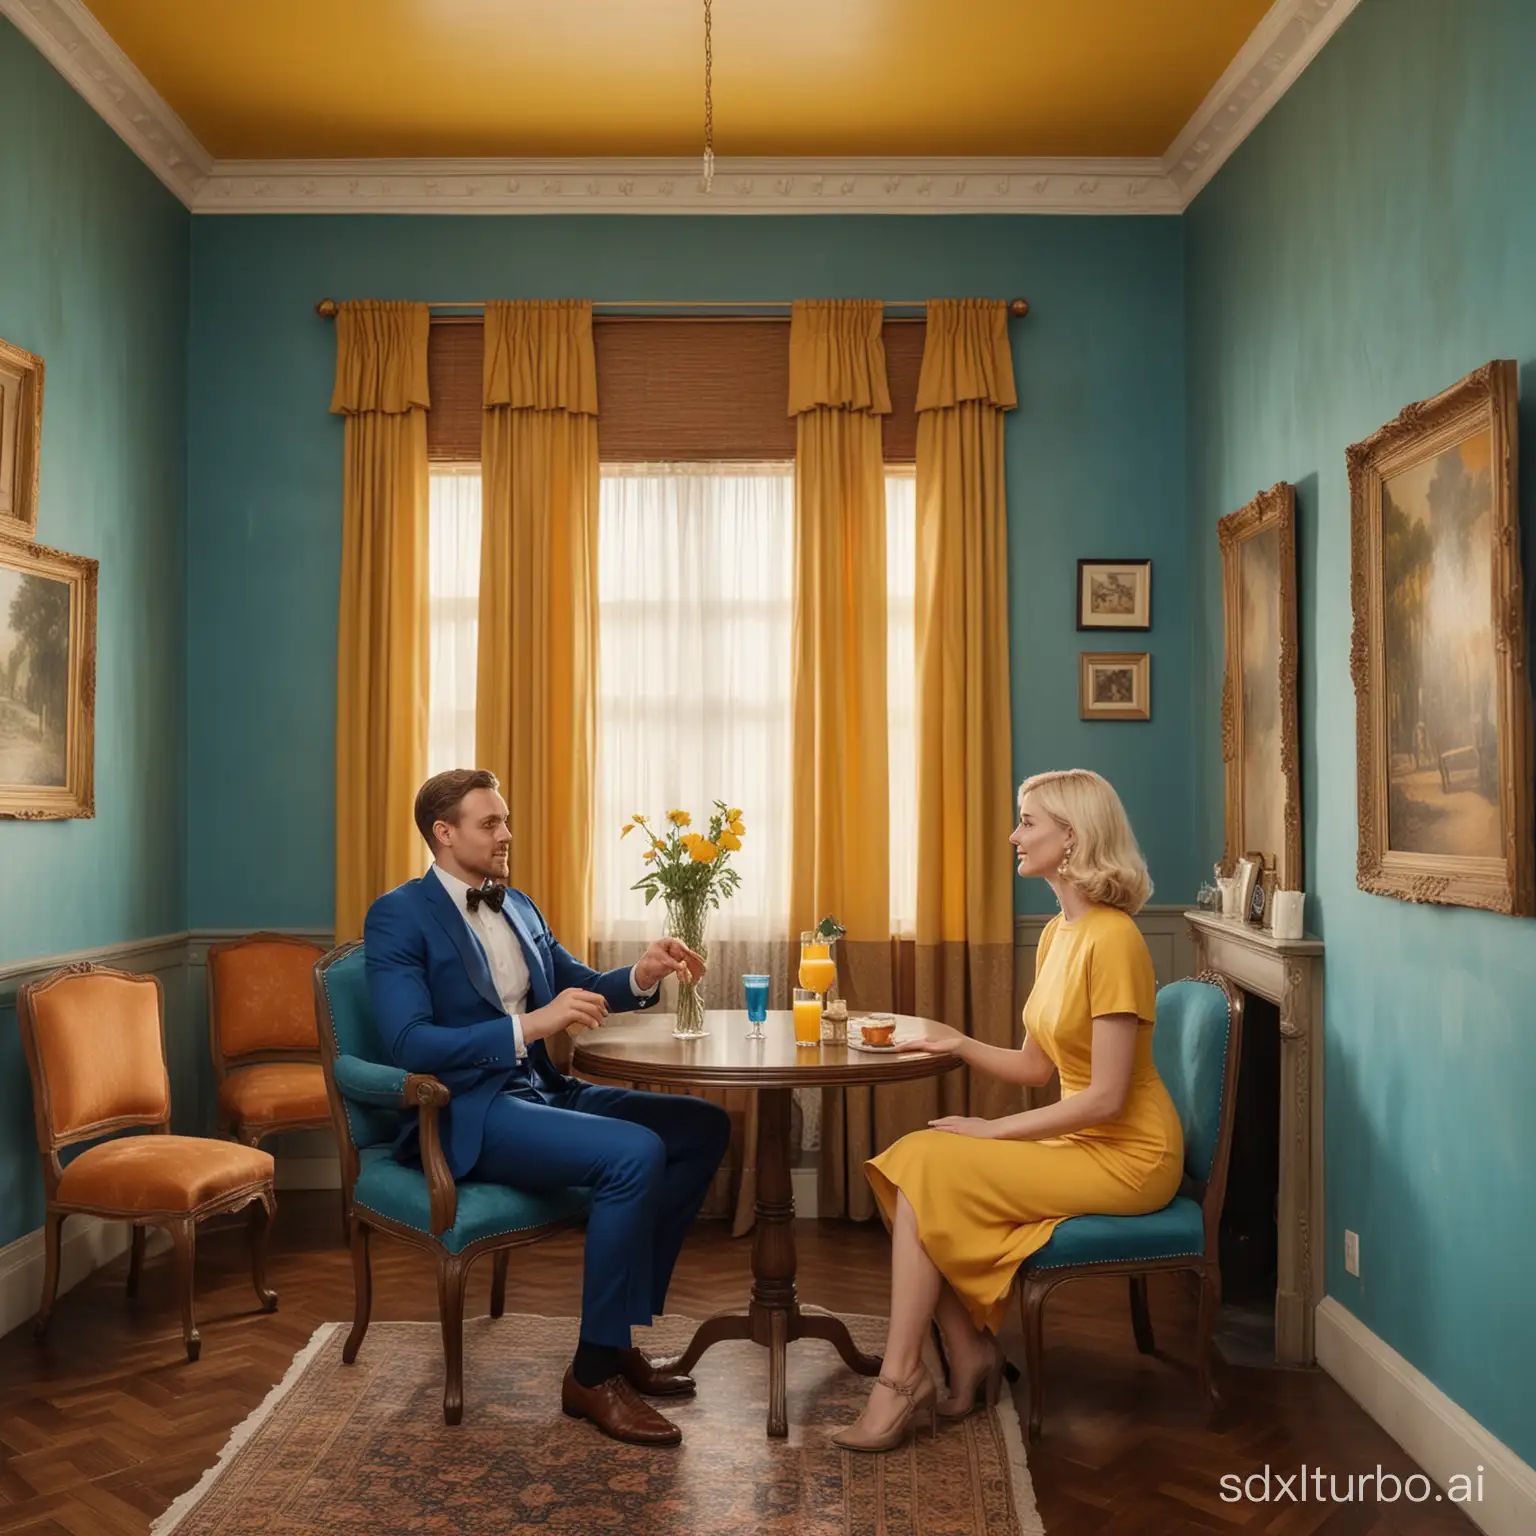 A man wearing a blue suit and a black bow tie and a blonde woman dressed in a yellow dress are in a blue room. They are sitting around a round table, each holding a stemmed glass of orange juice. The room is adorned with paintings hanging on the walls, and a brown curtain frames one of the windows. The vintage blue seats add a retro touch to the surroundings. The lighting is dim, creating a warm and intimate atmosphere. An electrical switch is visible on the wall, completing the room's decor.